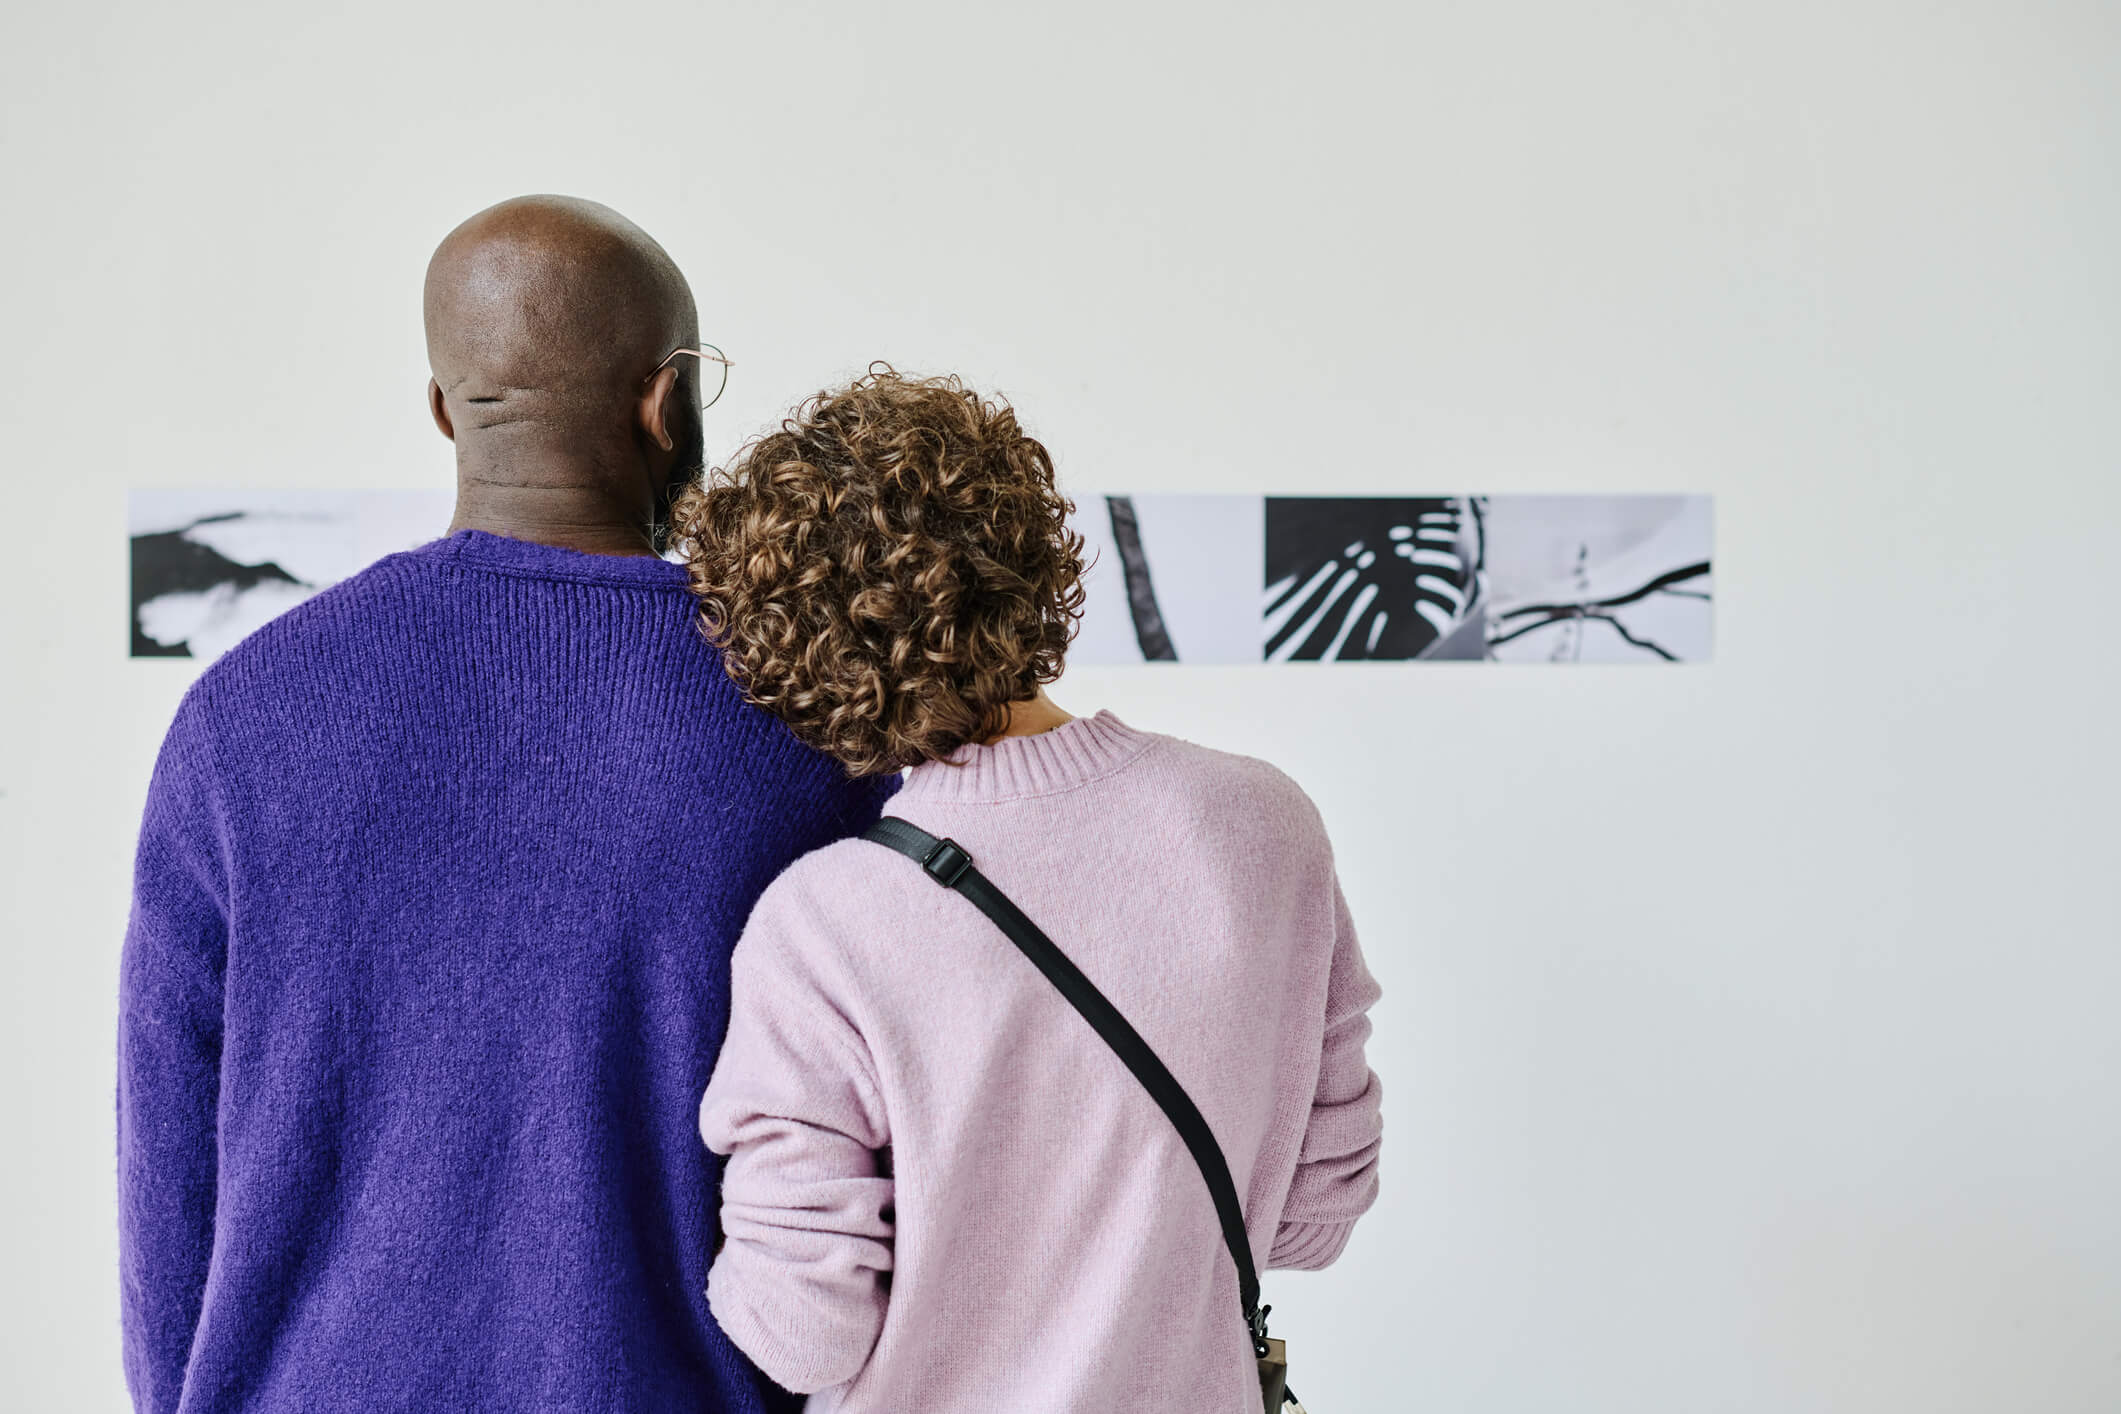 A couple wearing sweaters are standing up and looking at artwork on the wall in a museum; the woman has her head on the man’s shoulder.